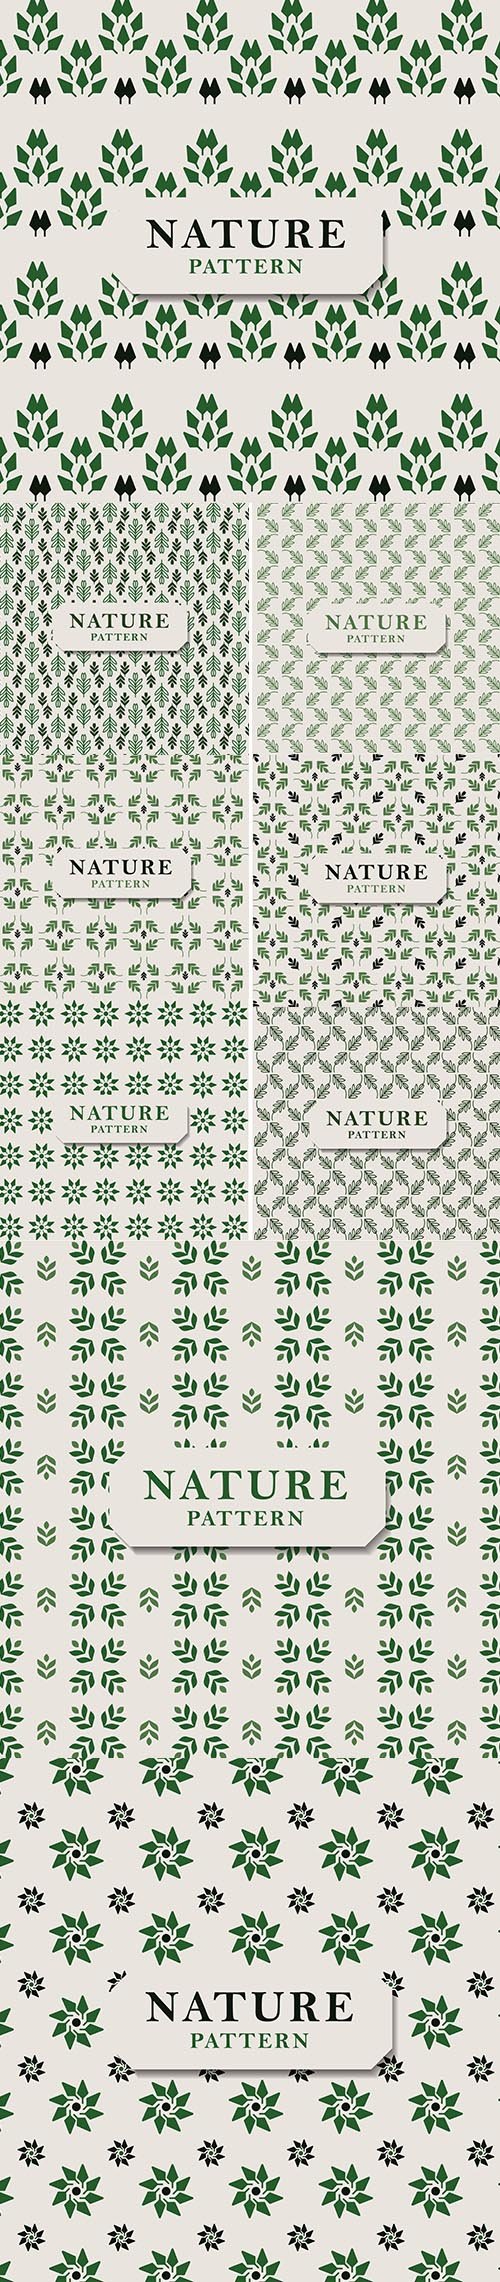 Seamless Nature Pattern Collection